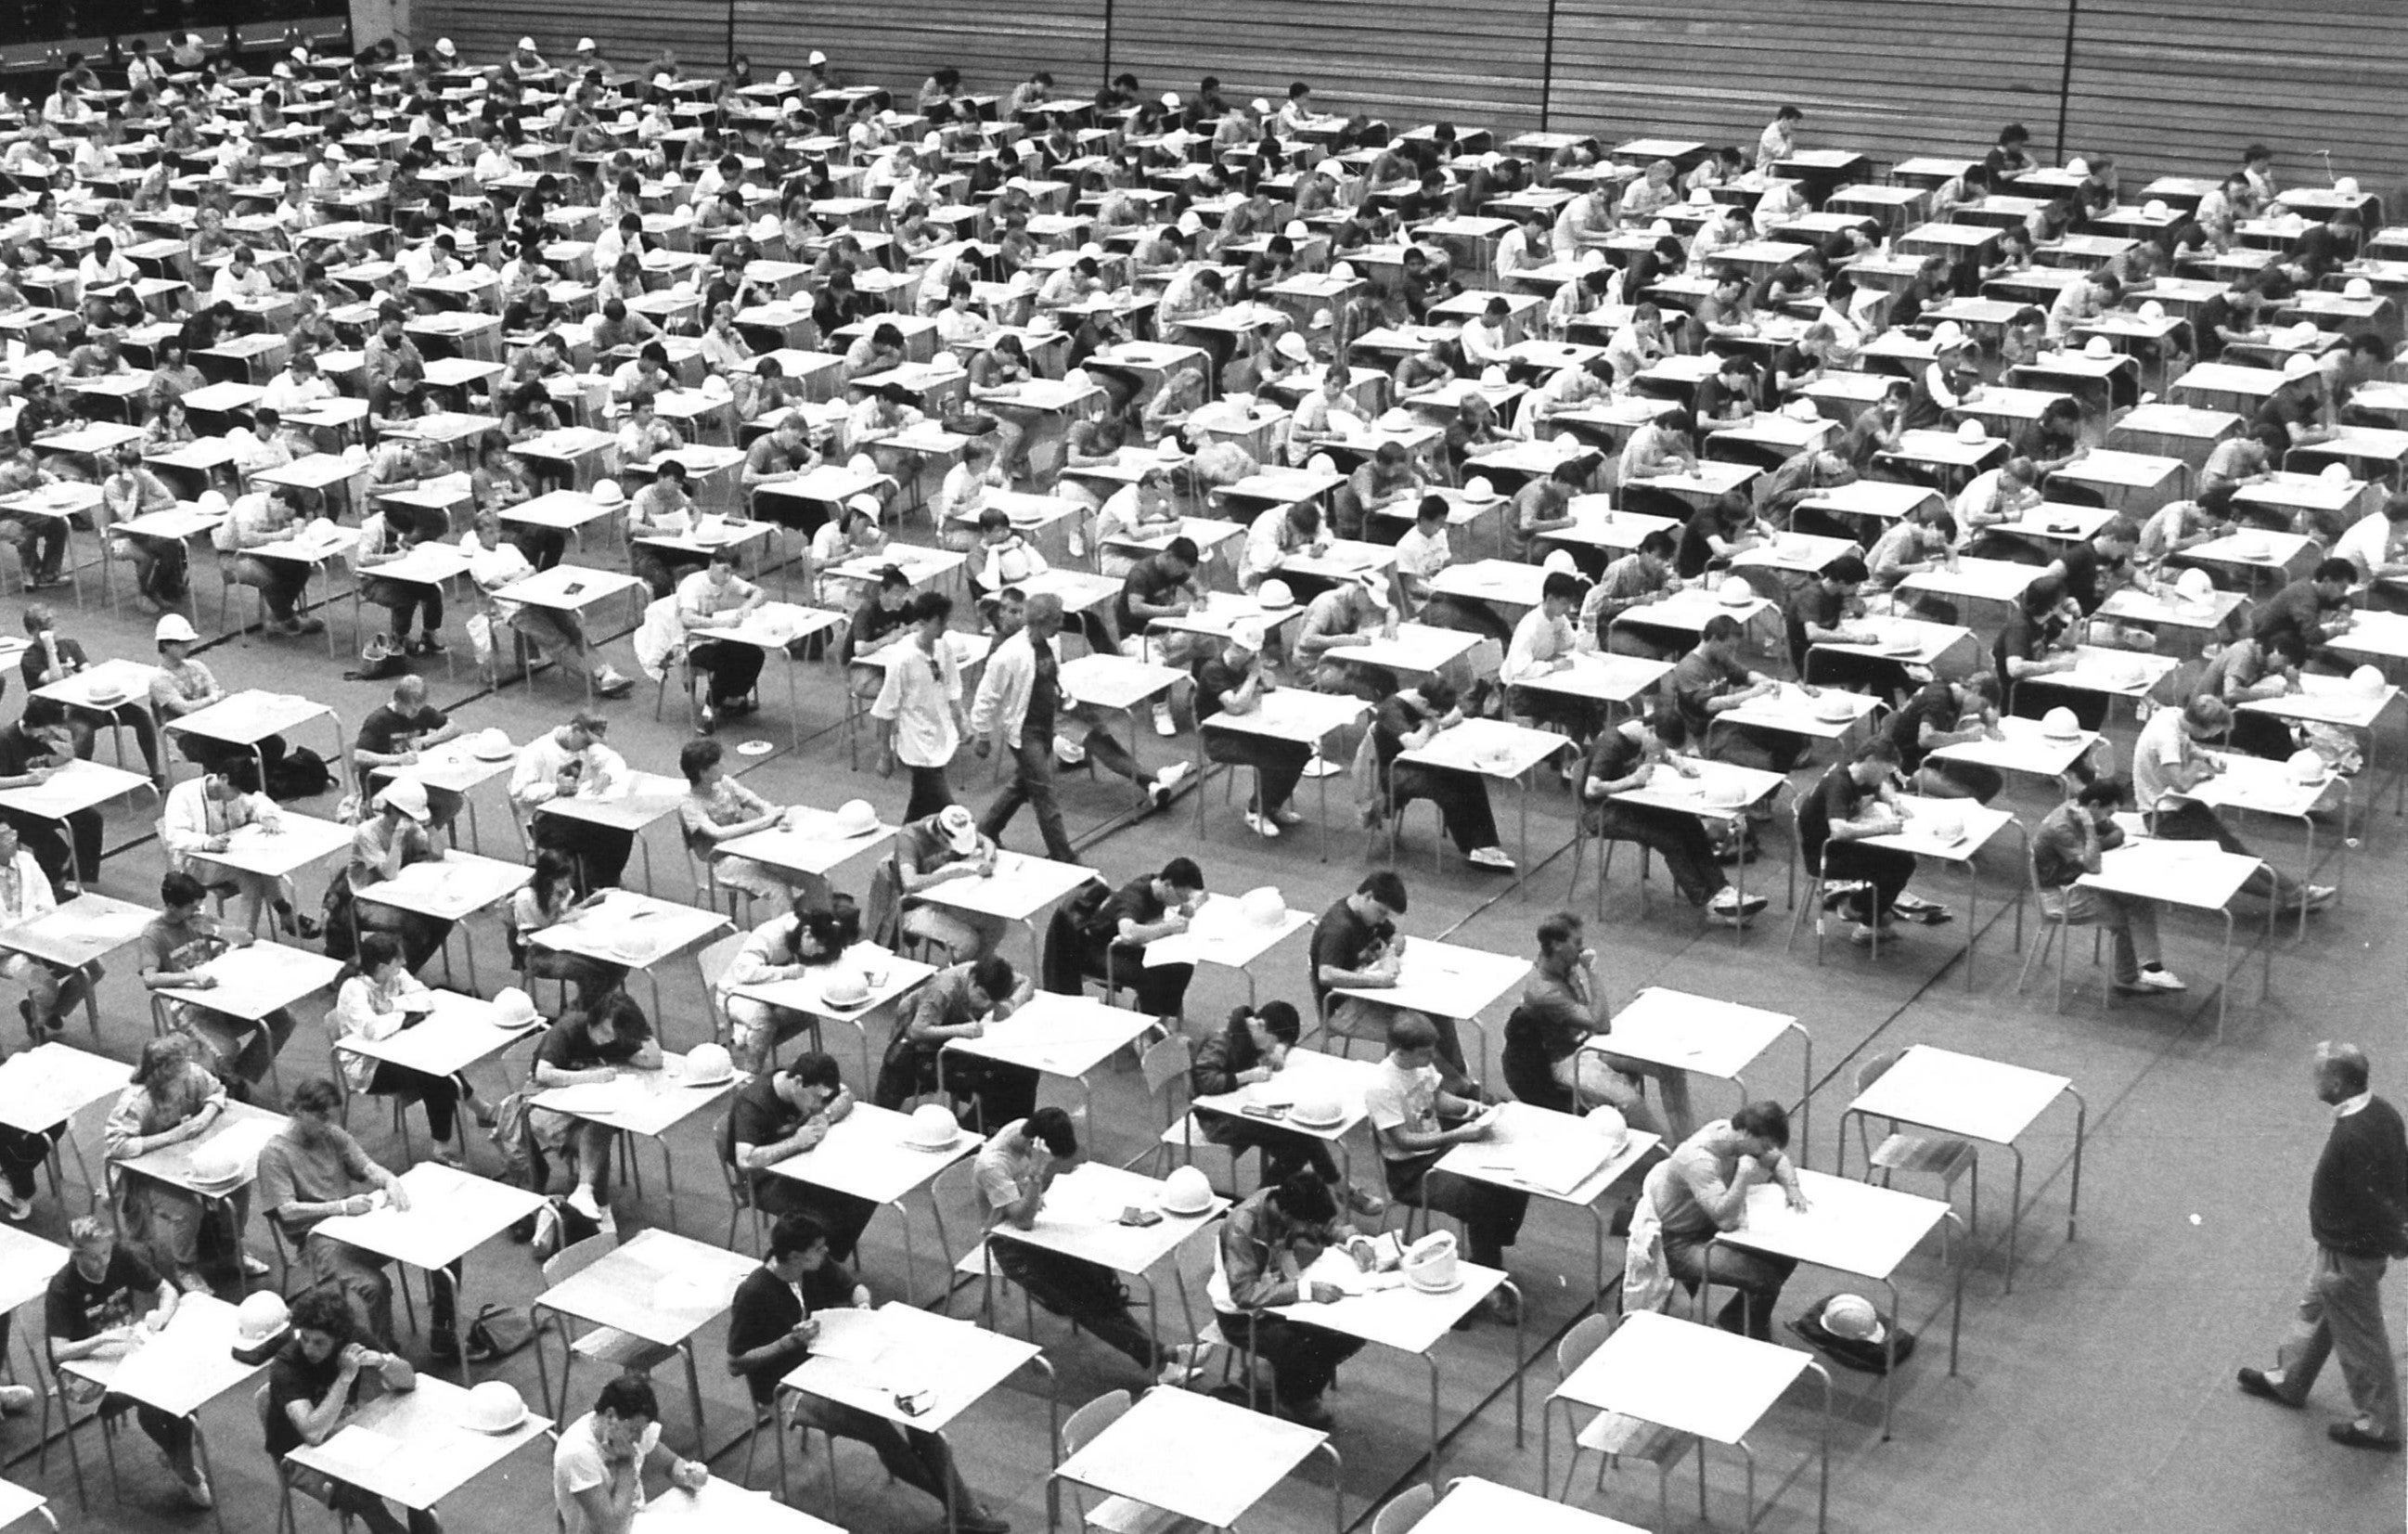 Students at exam tables in neat rows writing exams.